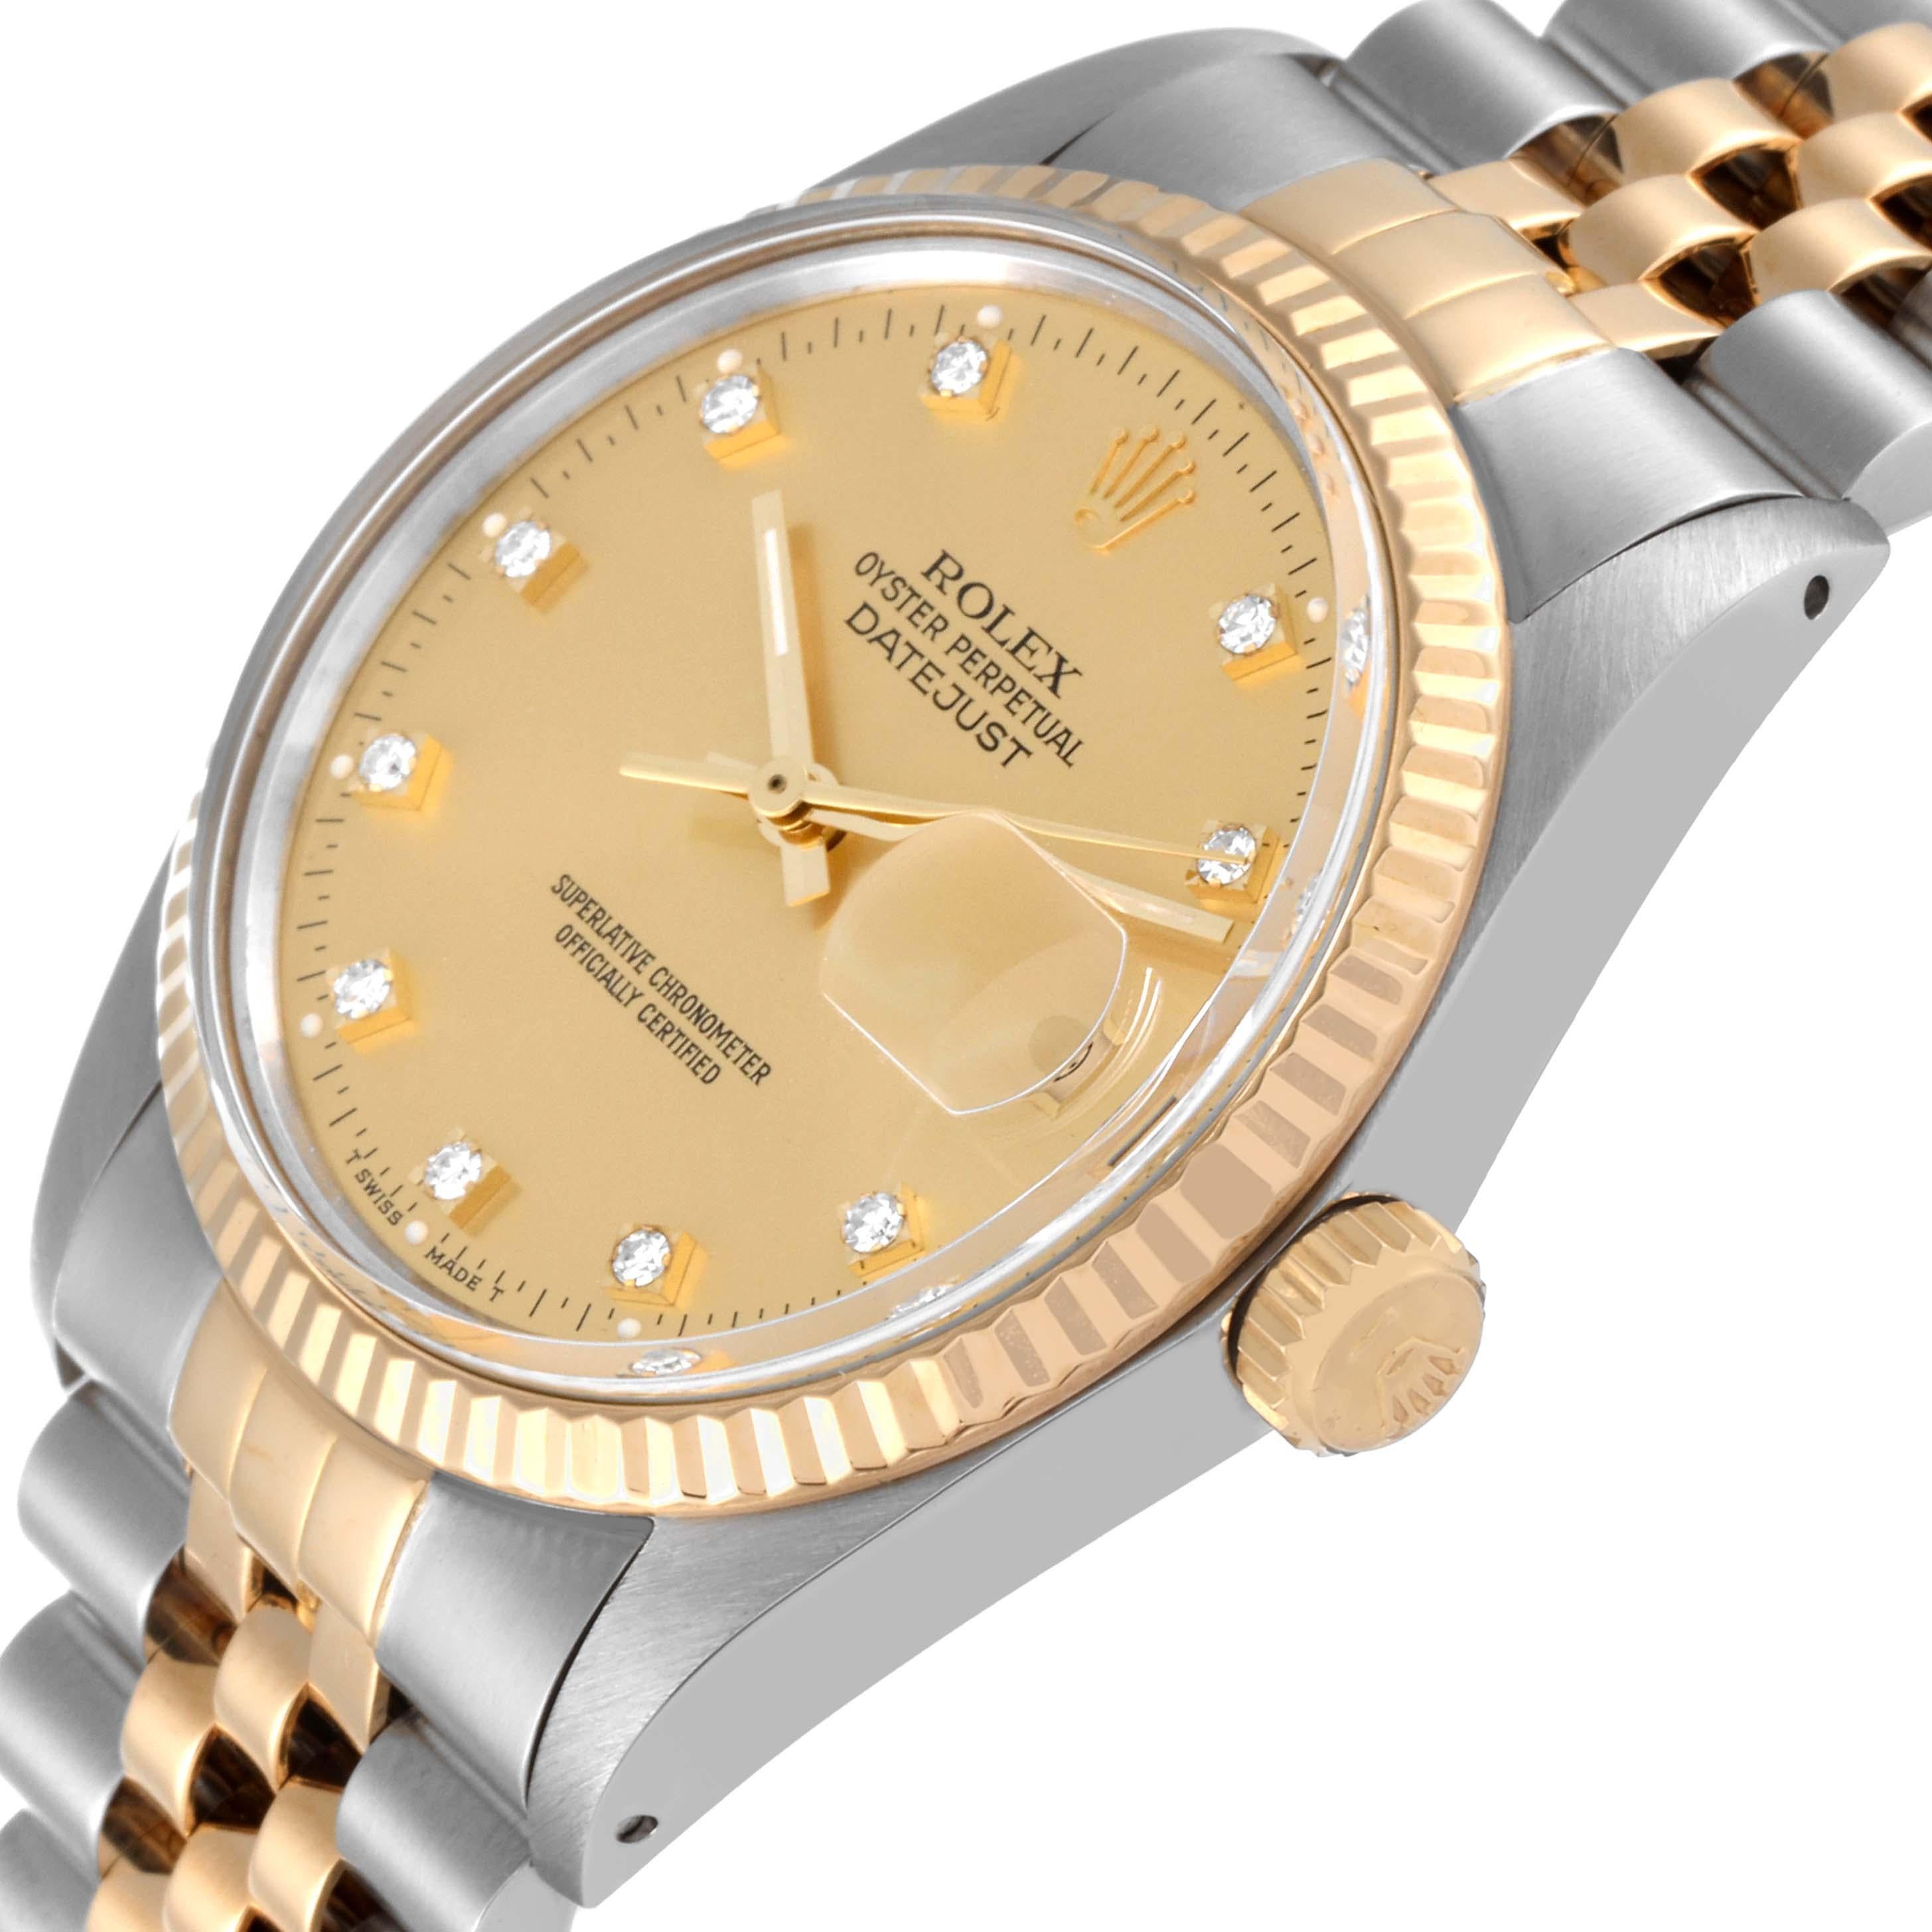 Rolex Datejust Steel Yellow Gold Diamond Vintage Mens Watch 16013 Box Papers 1